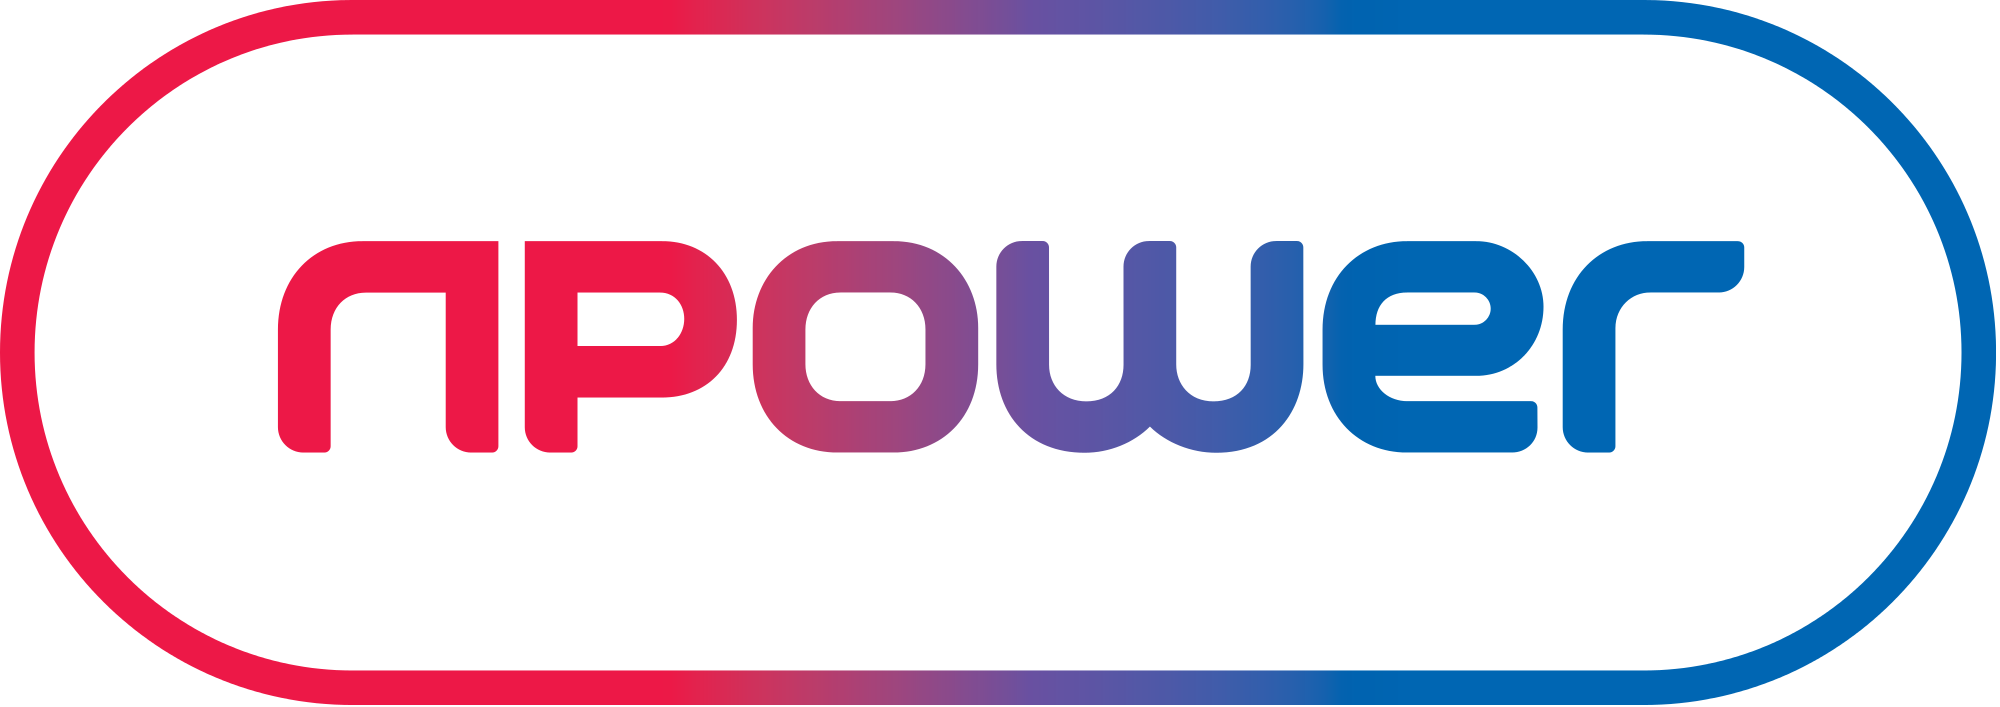 npower lozenge shaped logo in red and blue for explainer video page